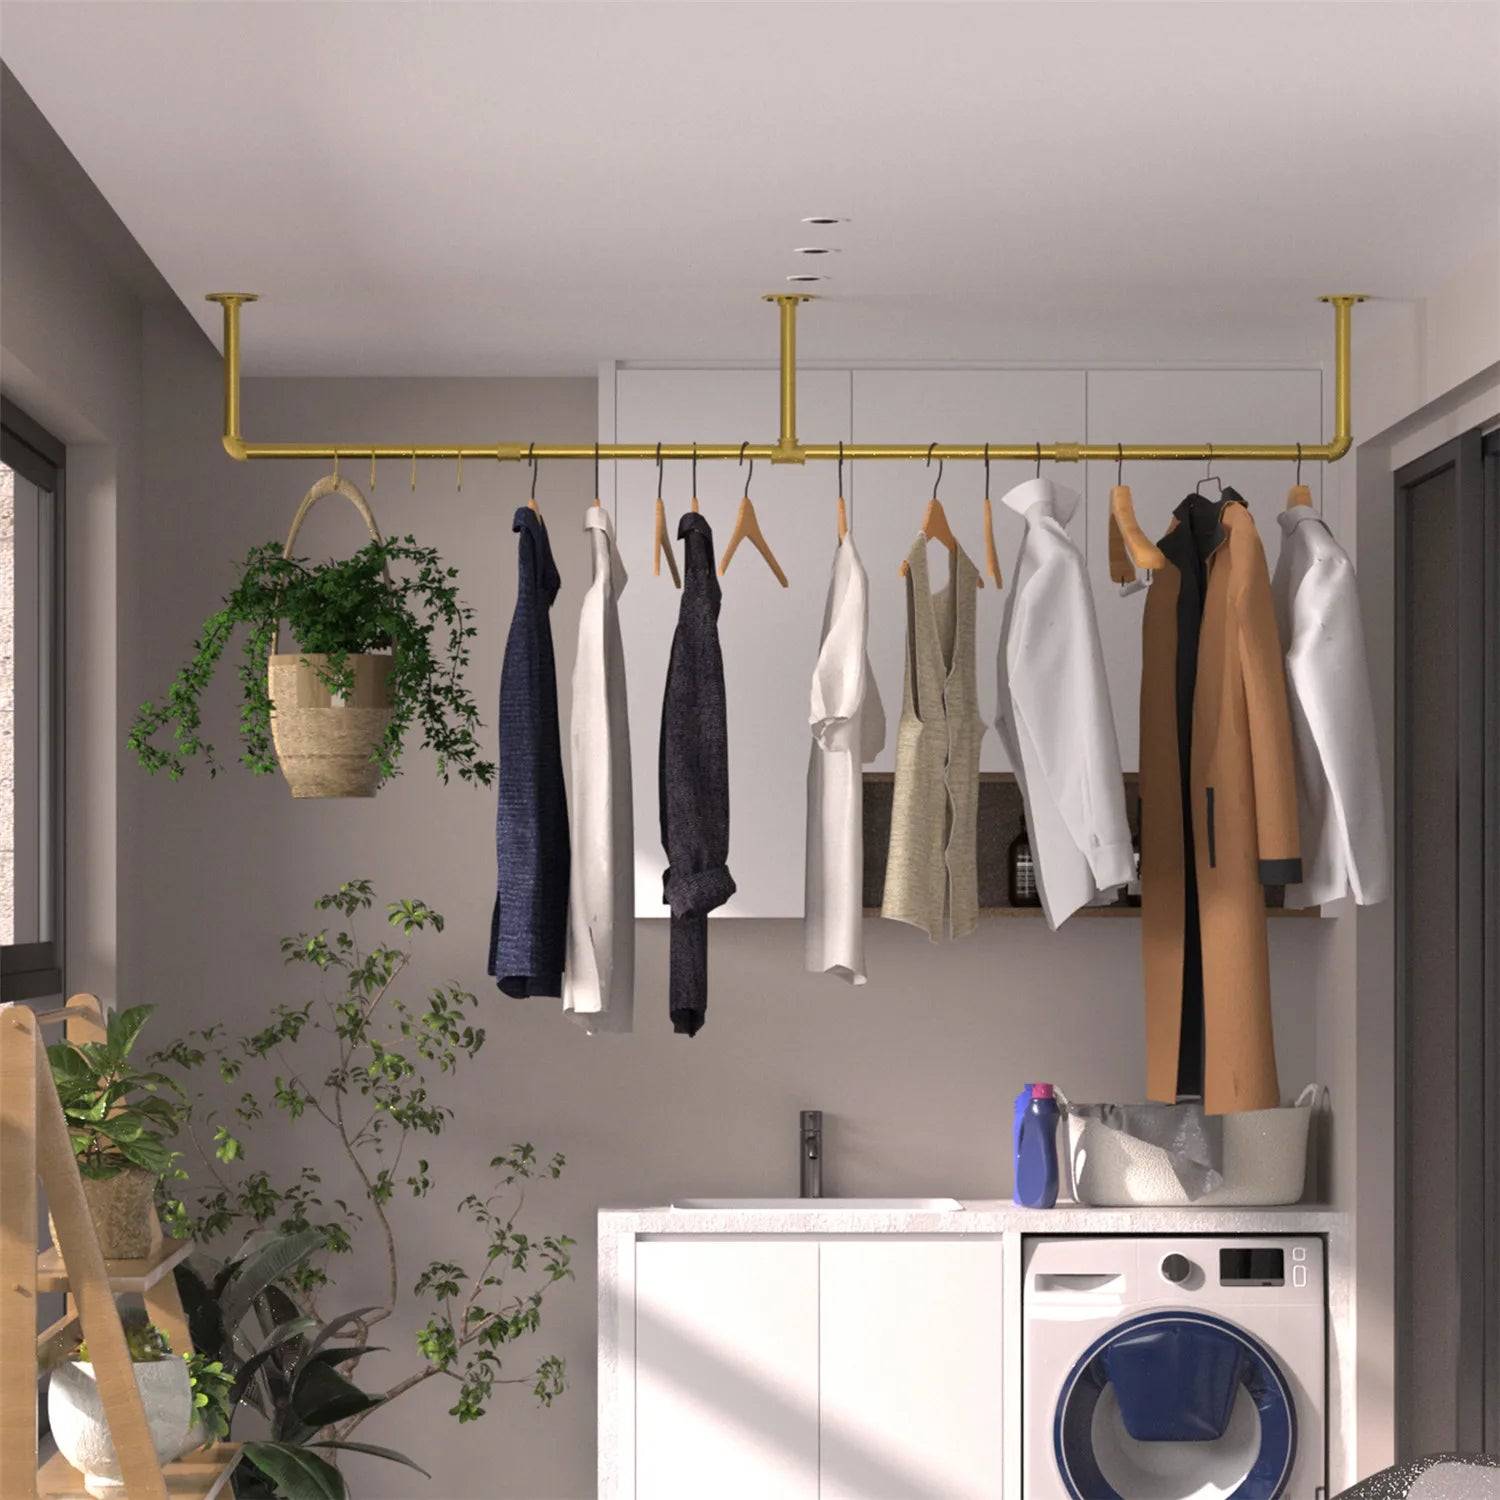 Chic-Industrial Style Wall-Mounted Clothes Rack - Coat Racks - KonnaLiving